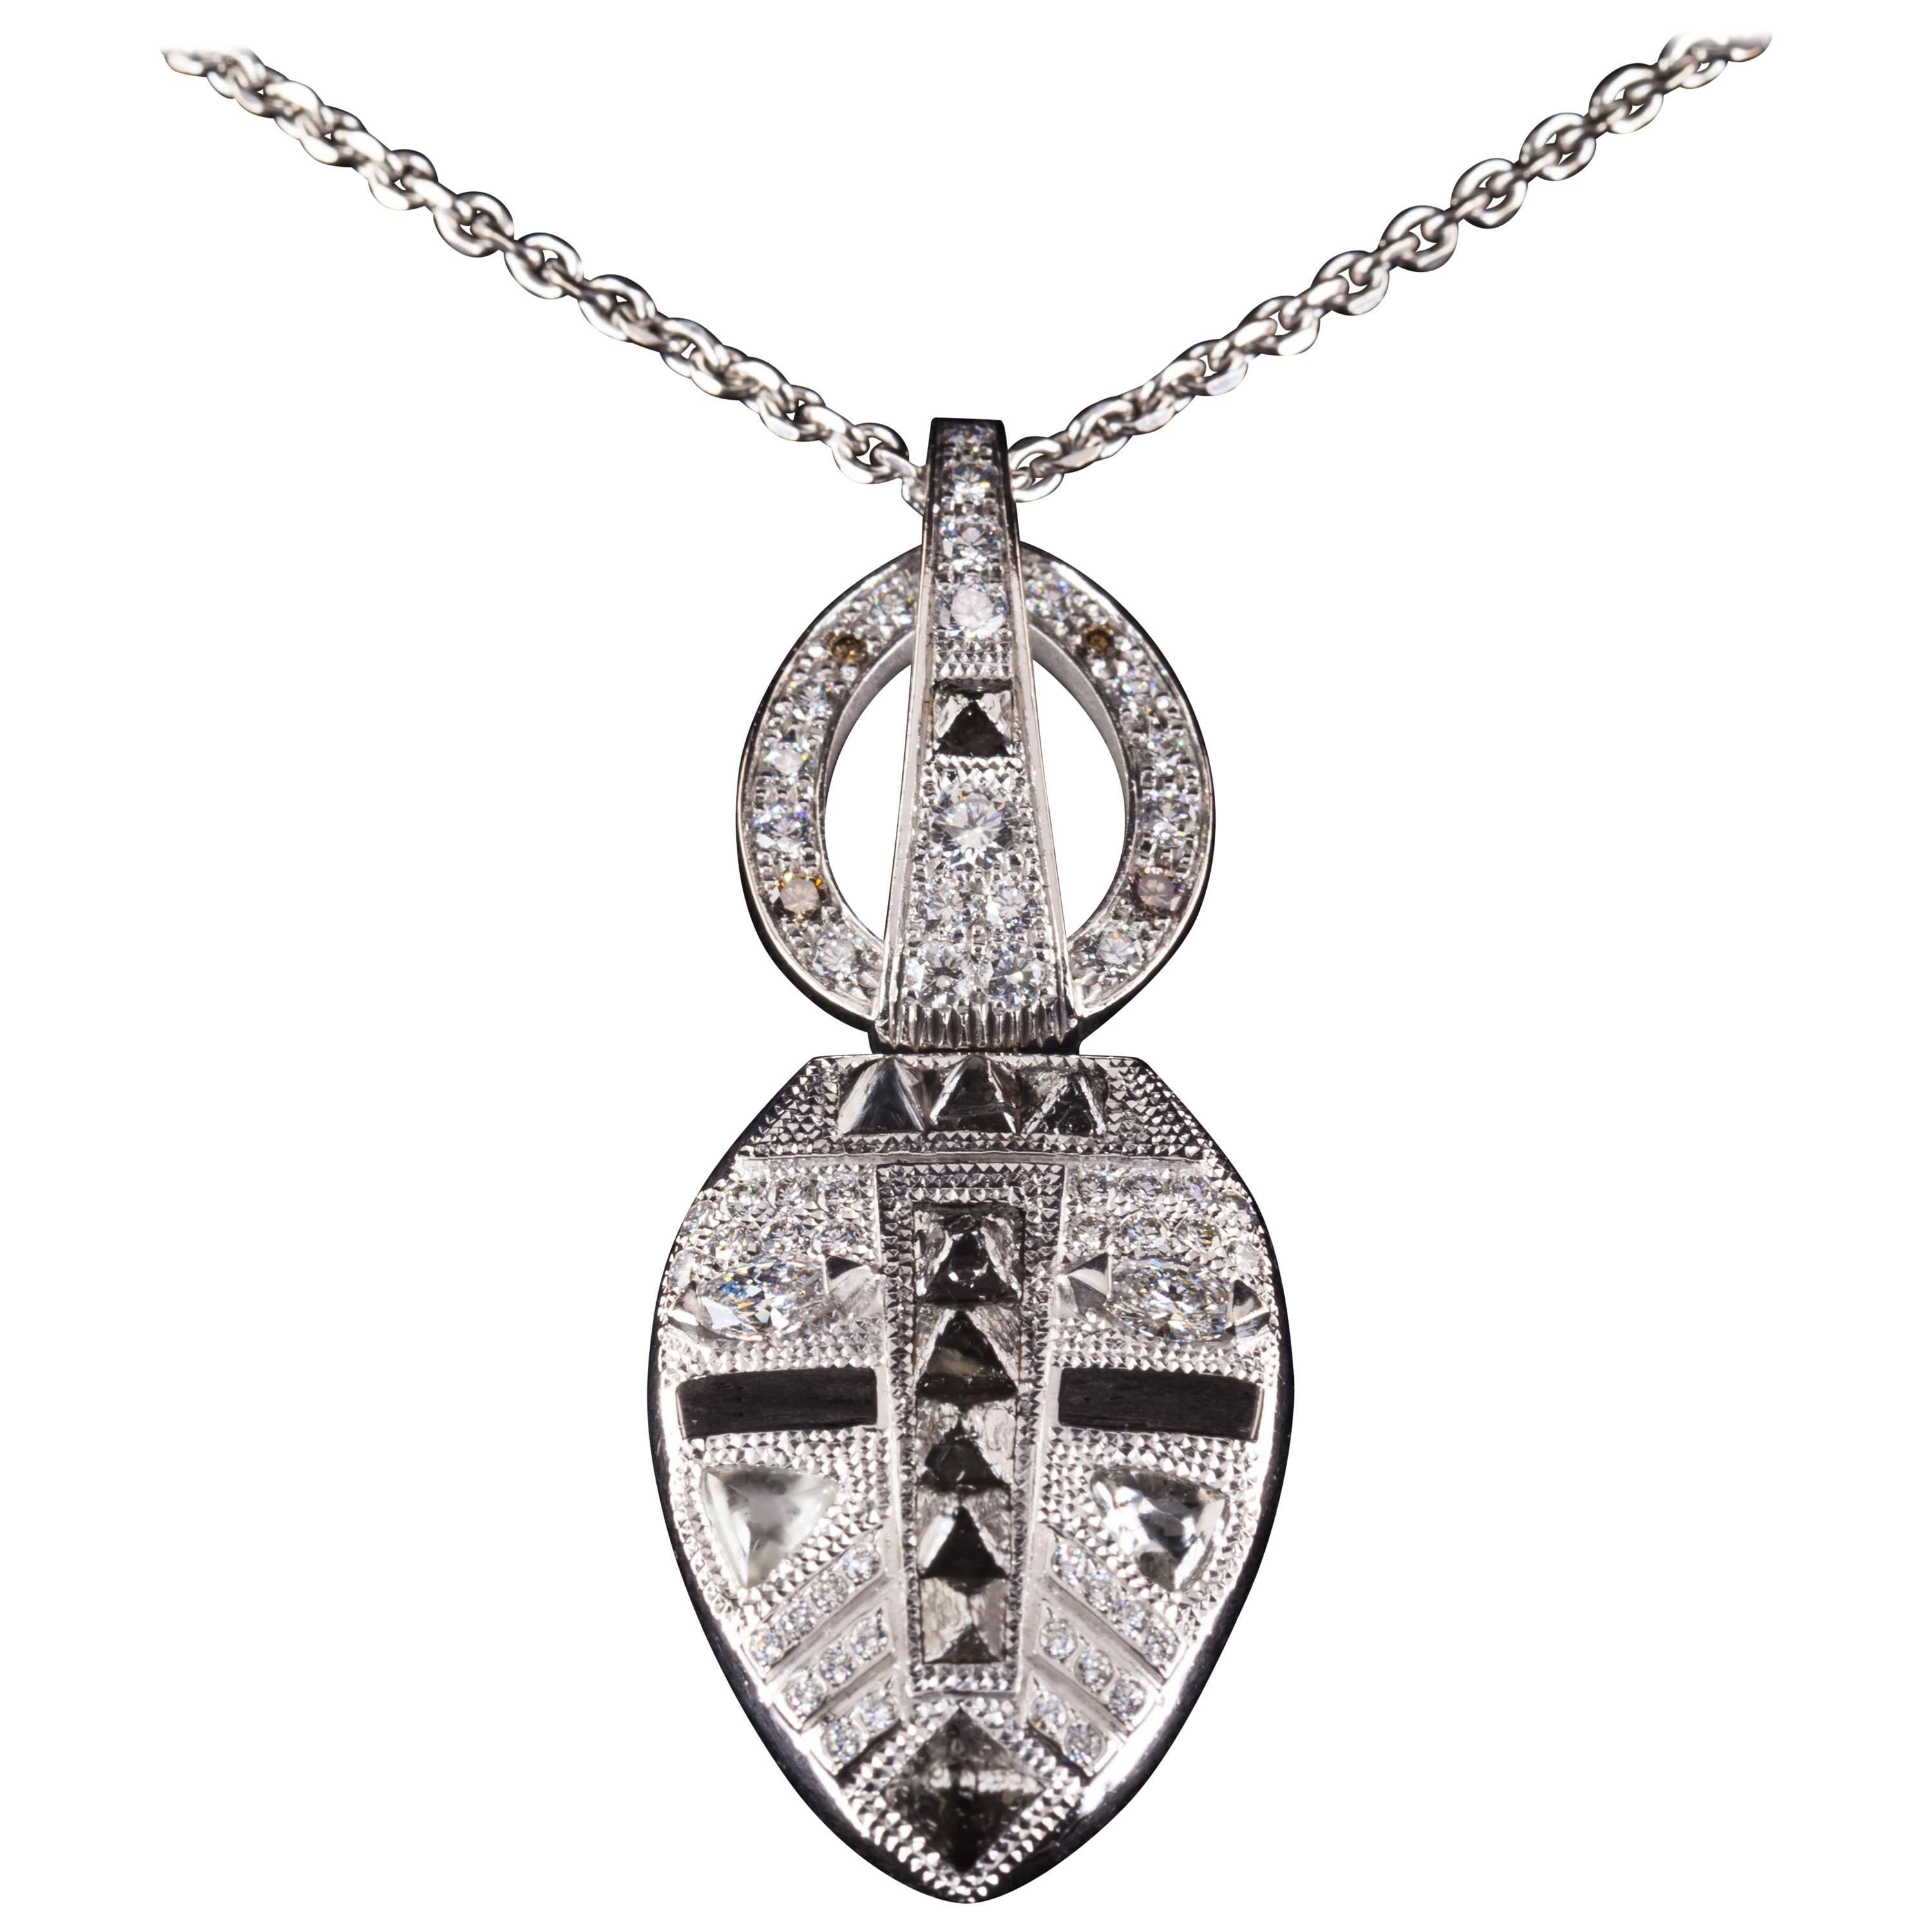 De Beers Rough Diamond Yayadhama Amulet Pendant from Talisman Collection For Sale